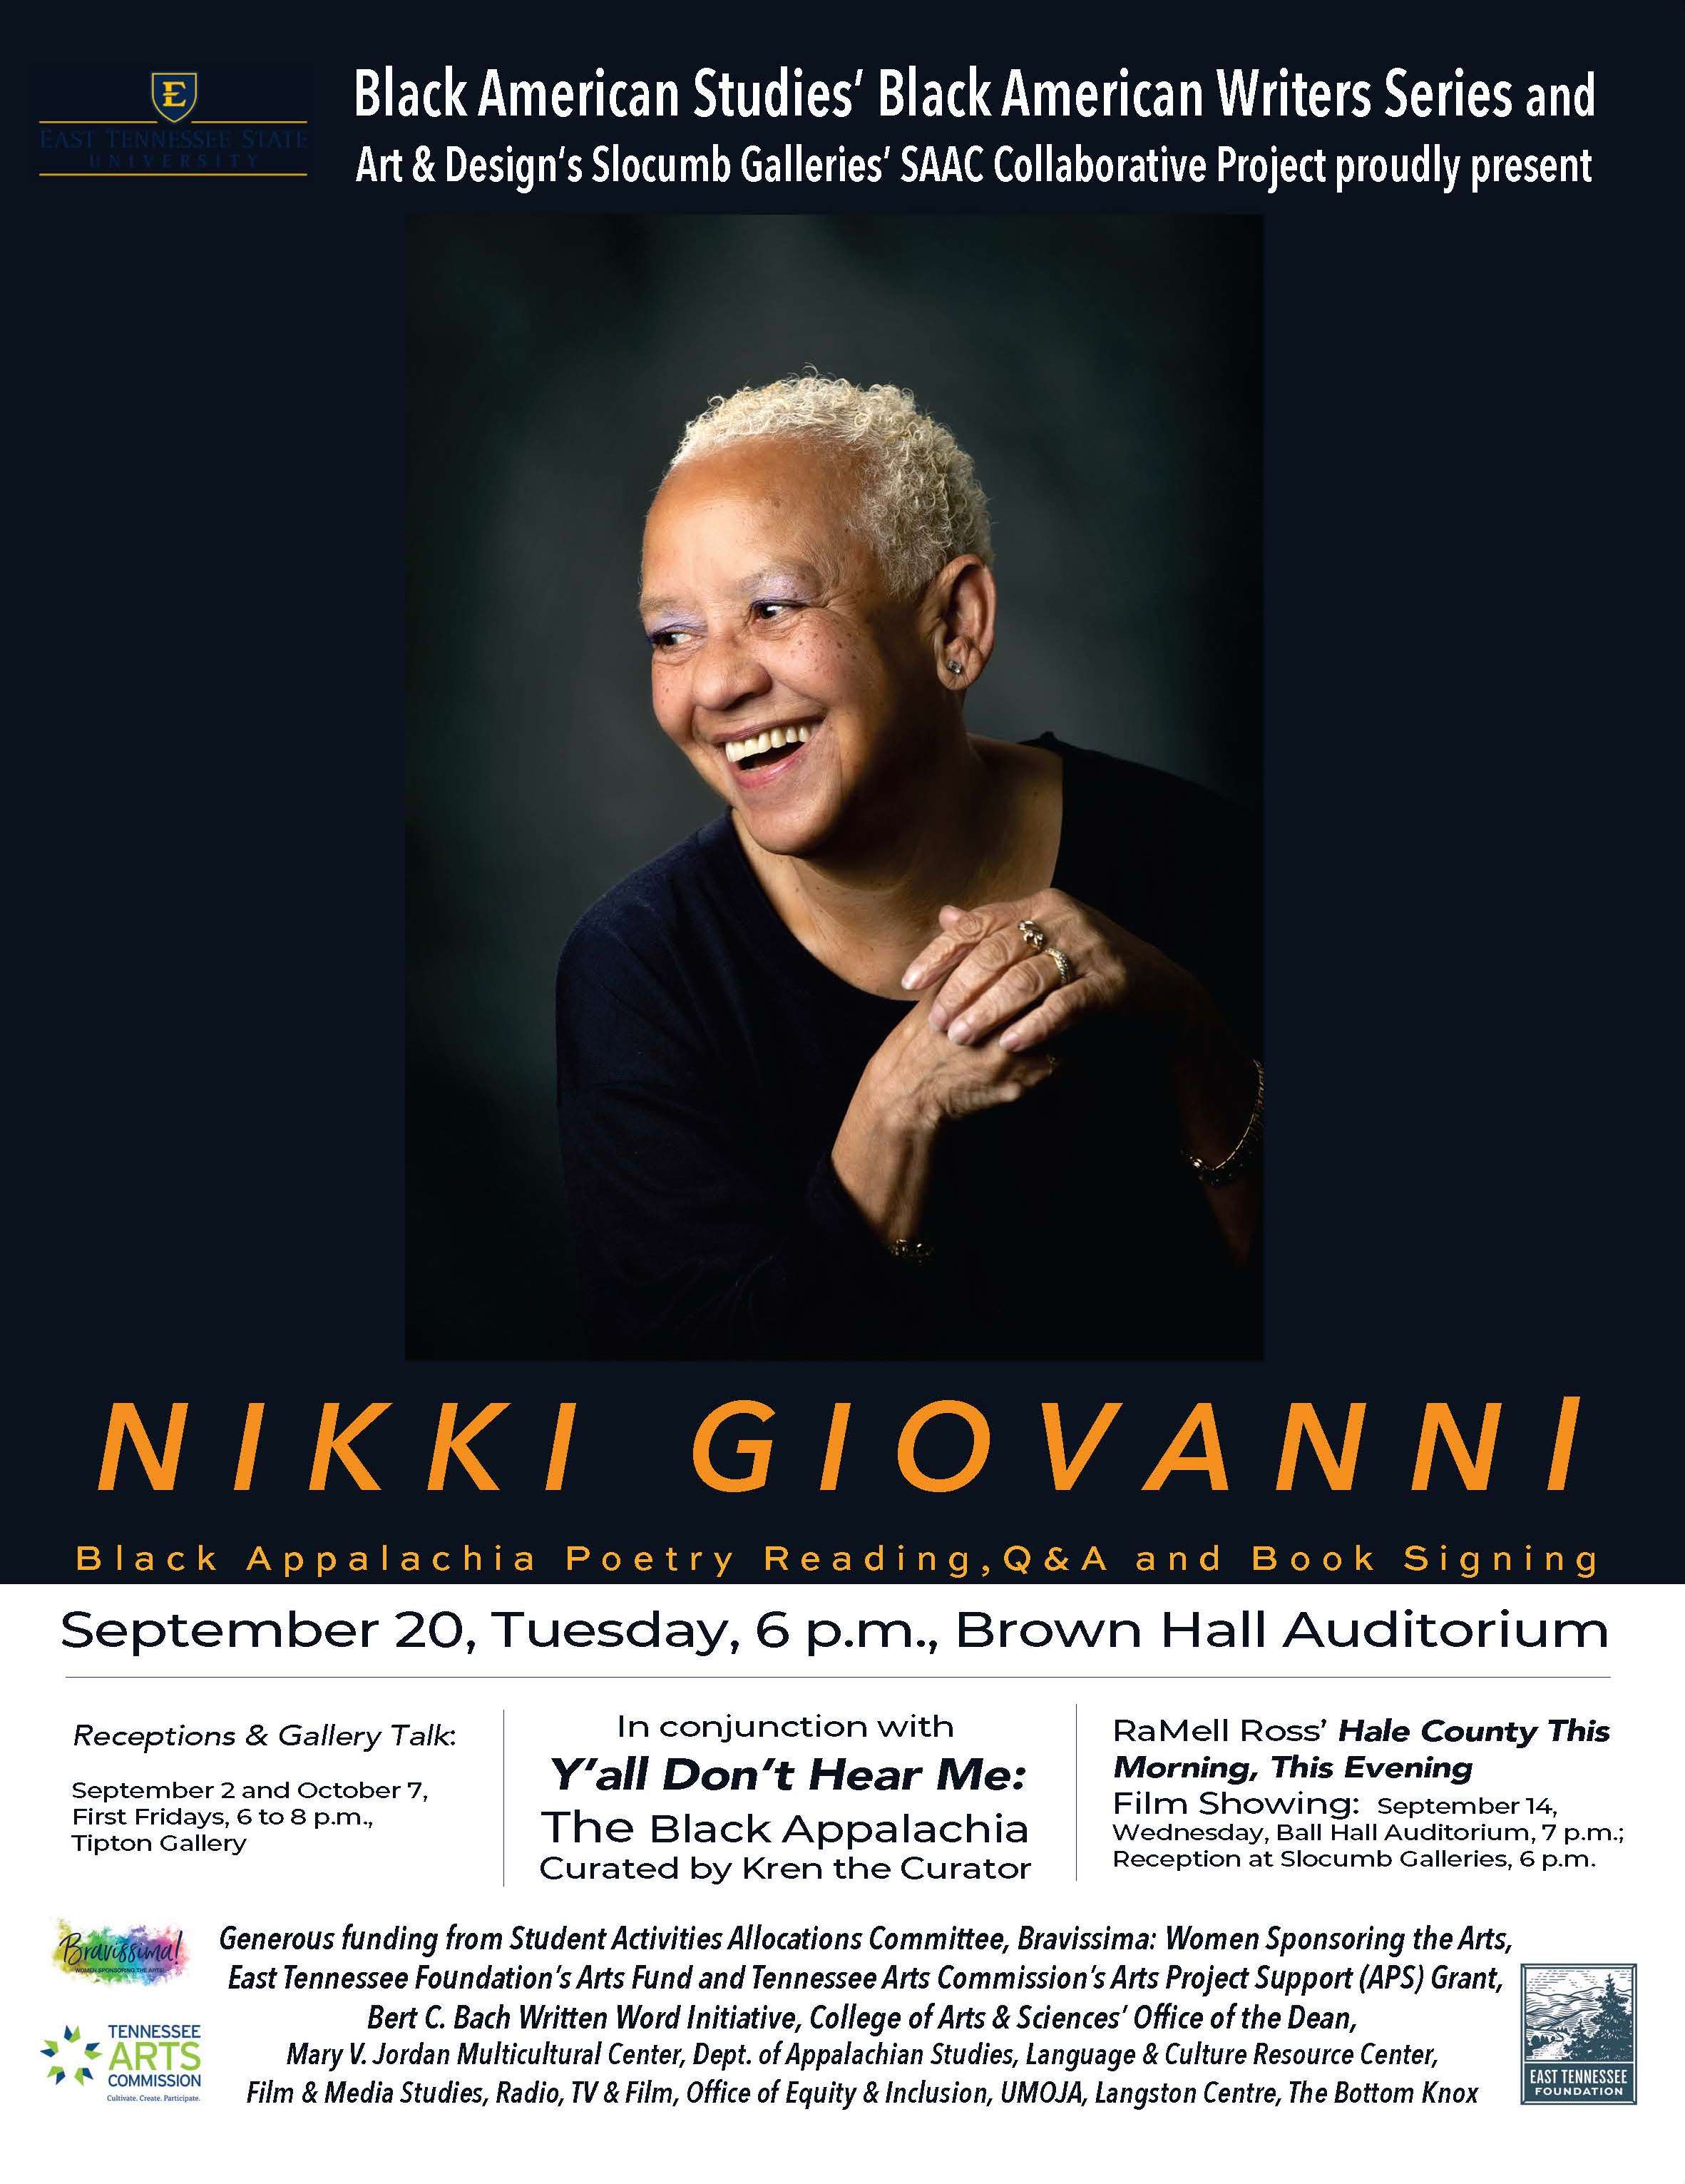 Nikki Giovanni Poster with event information detailed in the commentary above